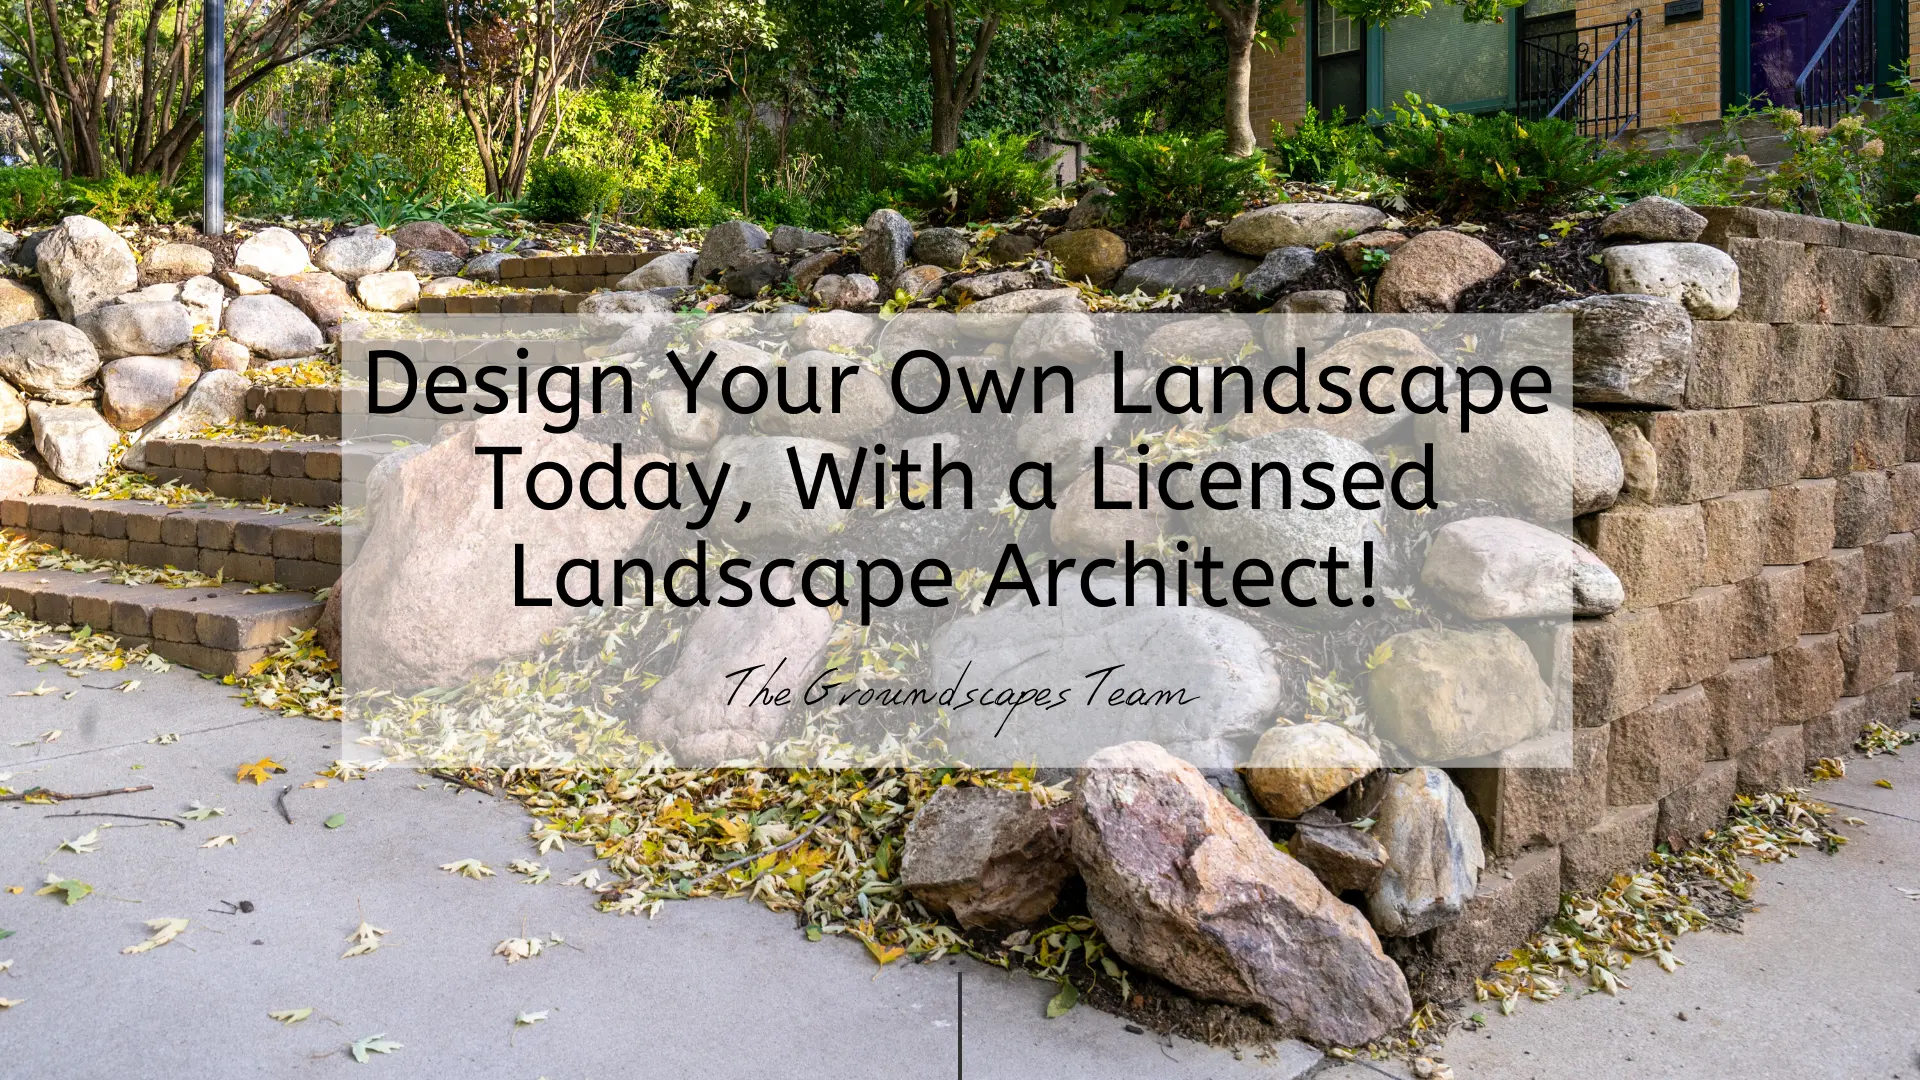 Design Your Own Landscape Today, With a Licensed Landscape Architect!